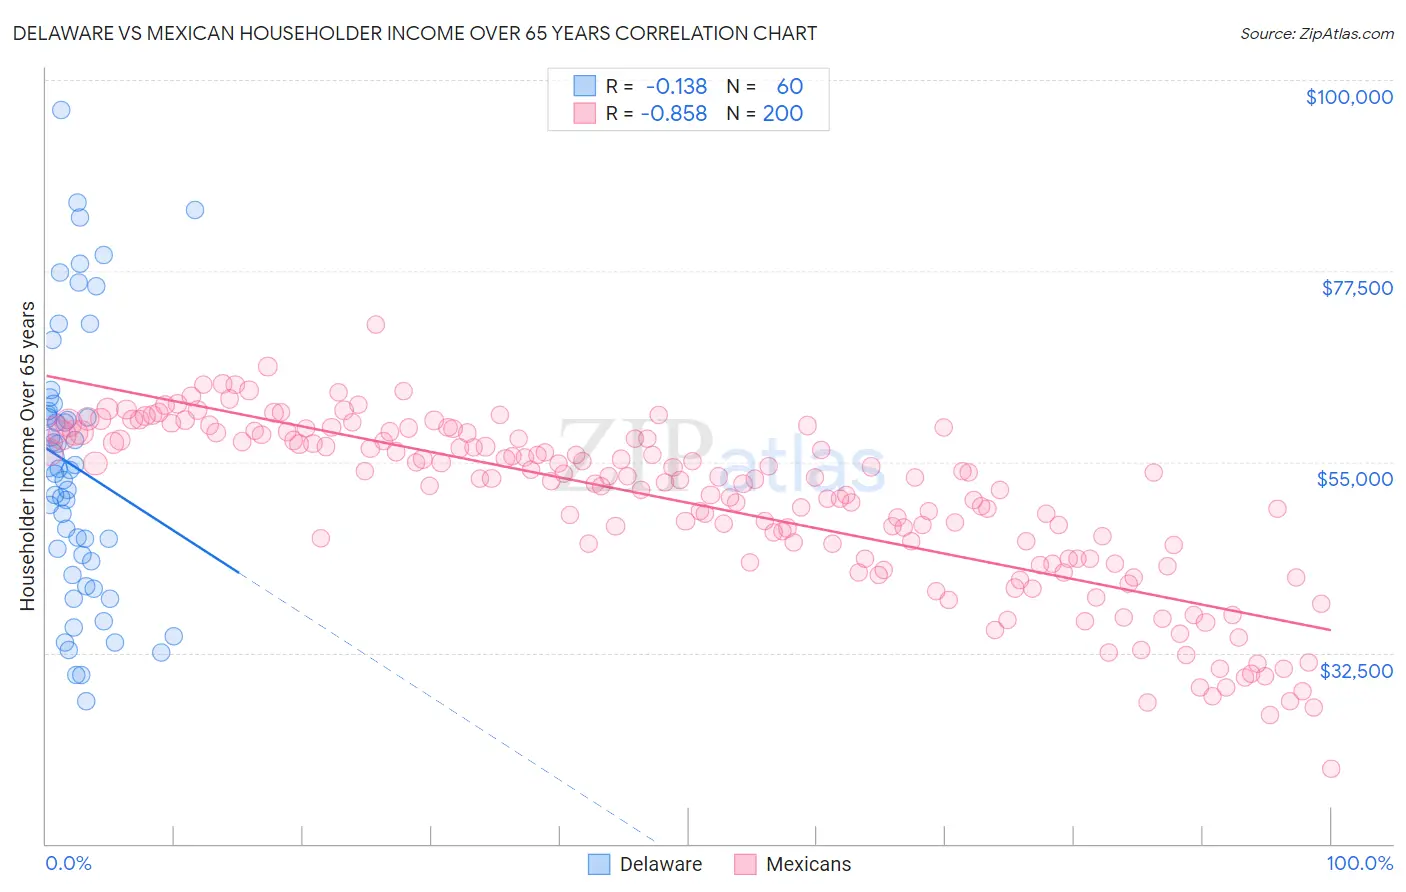 Delaware vs Mexican Householder Income Over 65 years